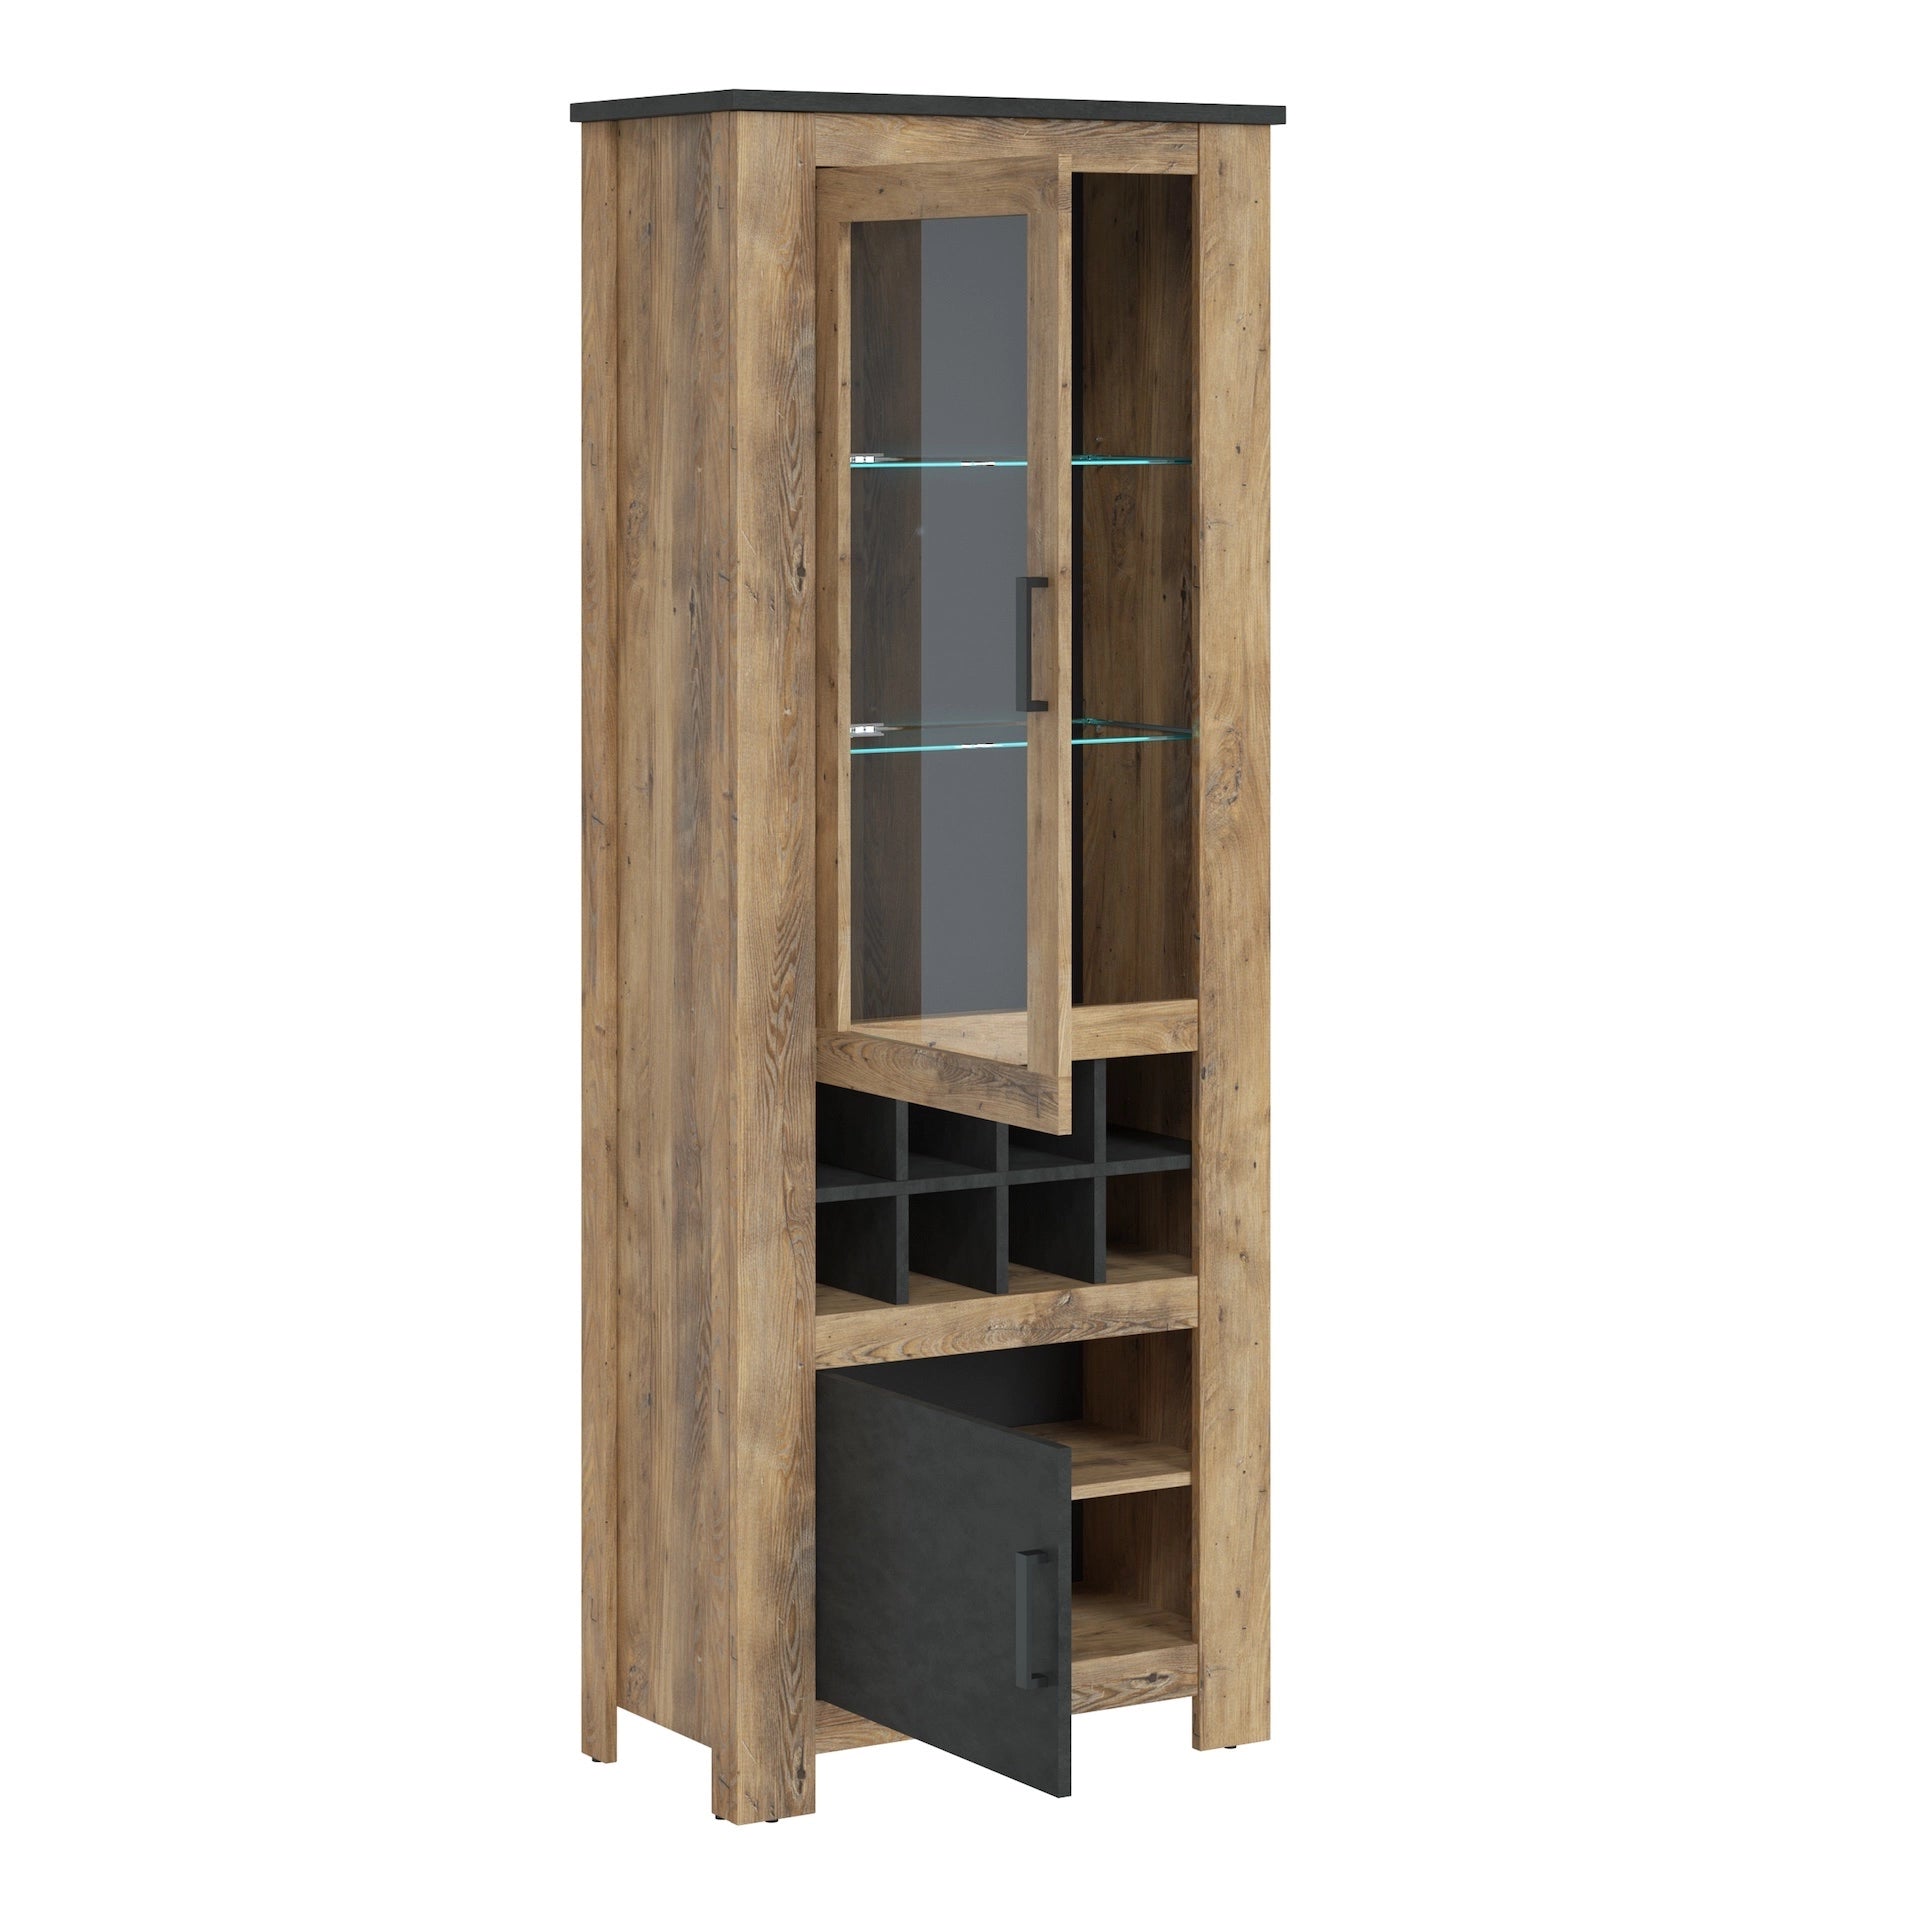 Furniture To Go Rapallo 2 Door Display Cabinet with Wine Rack in Chestnut & Matera Grey